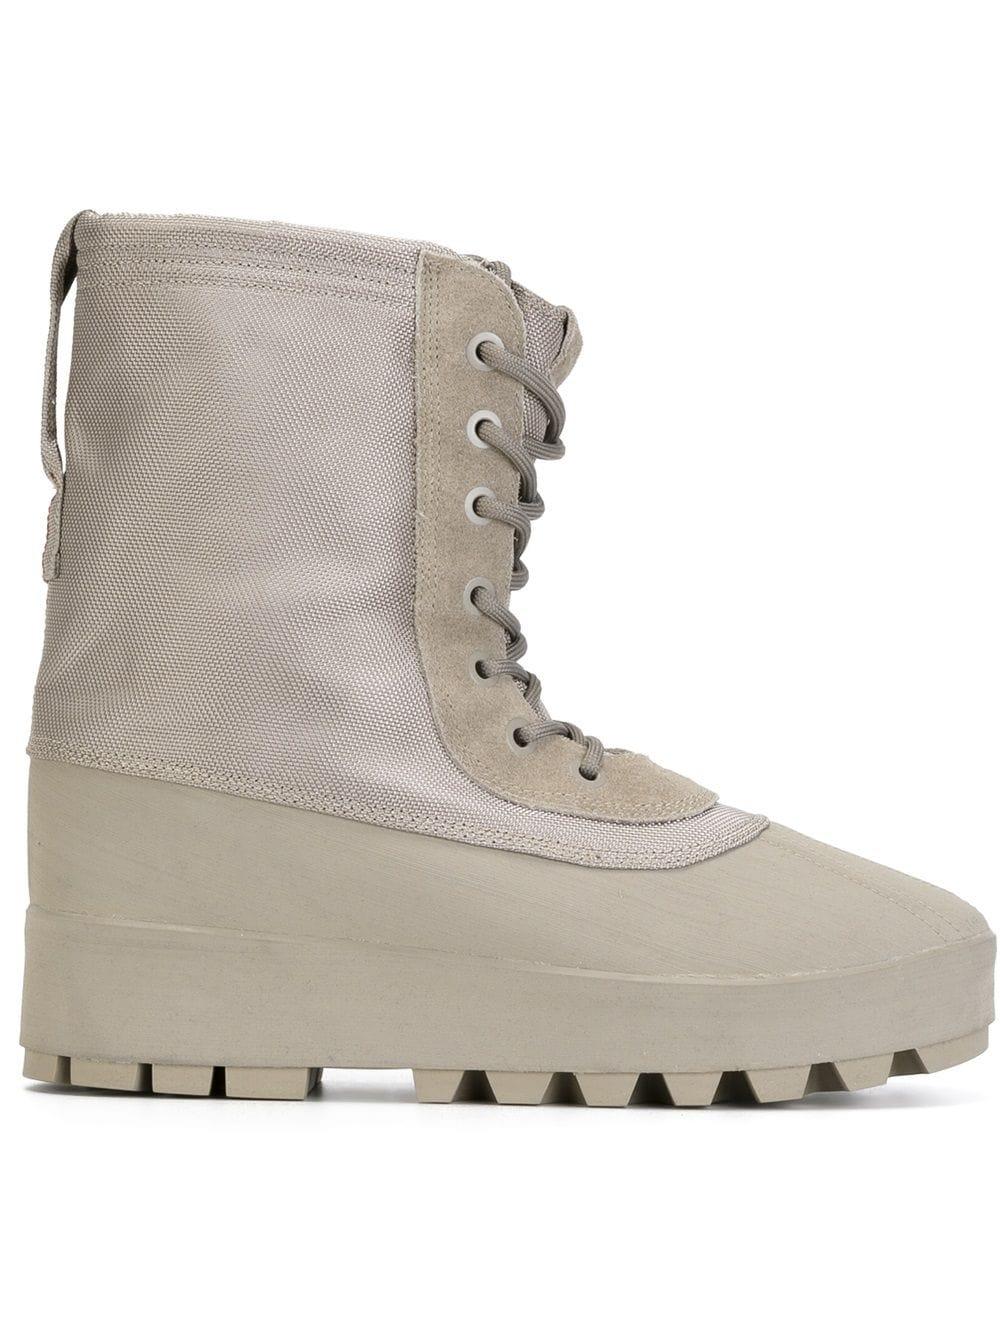 Yeezy Adidas Originals By Kanye West '950' Boots for Men Lyst